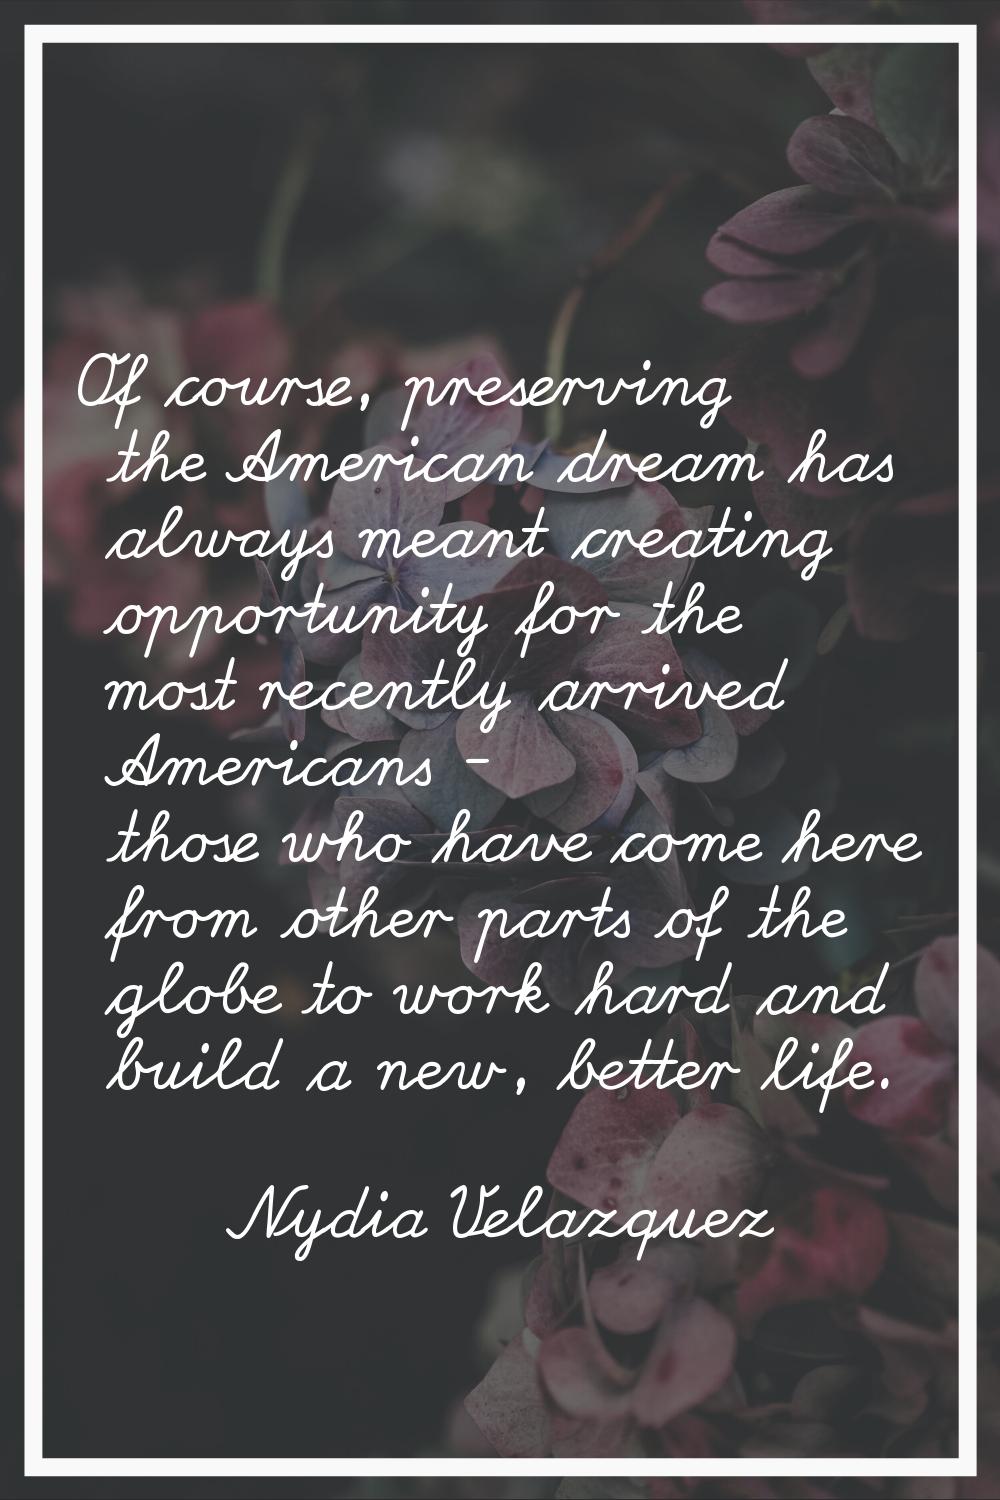 Of course, preserving the American dream has always meant creating opportunity for the most recentl